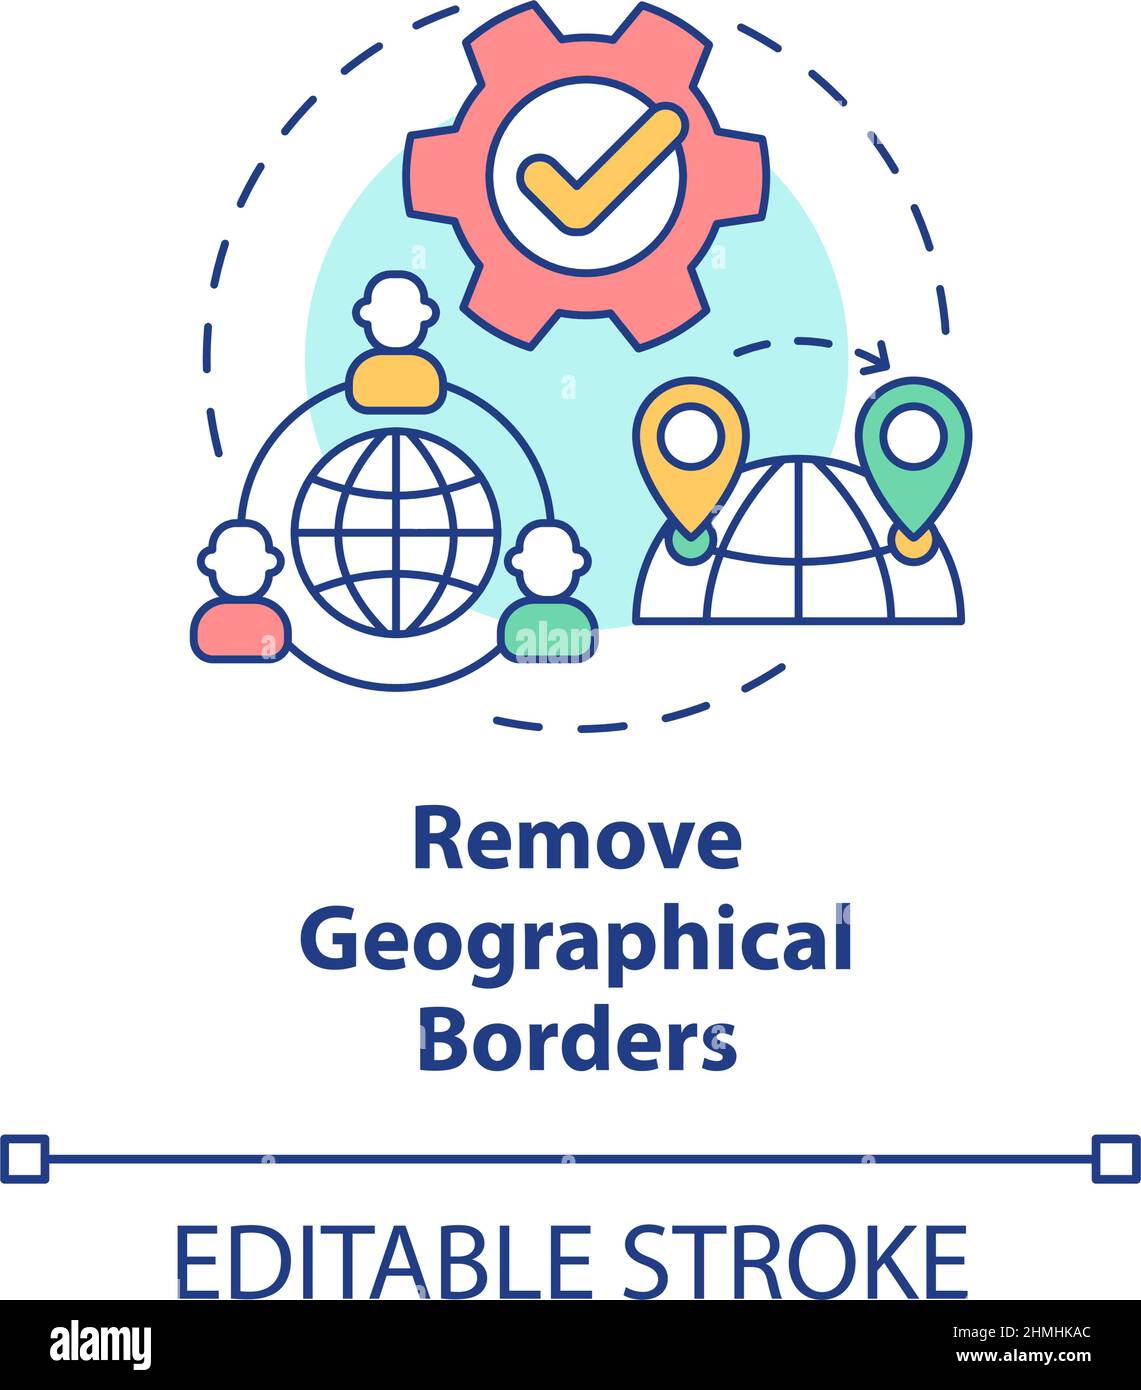 Remove geographical borders concept icon Stock Vector